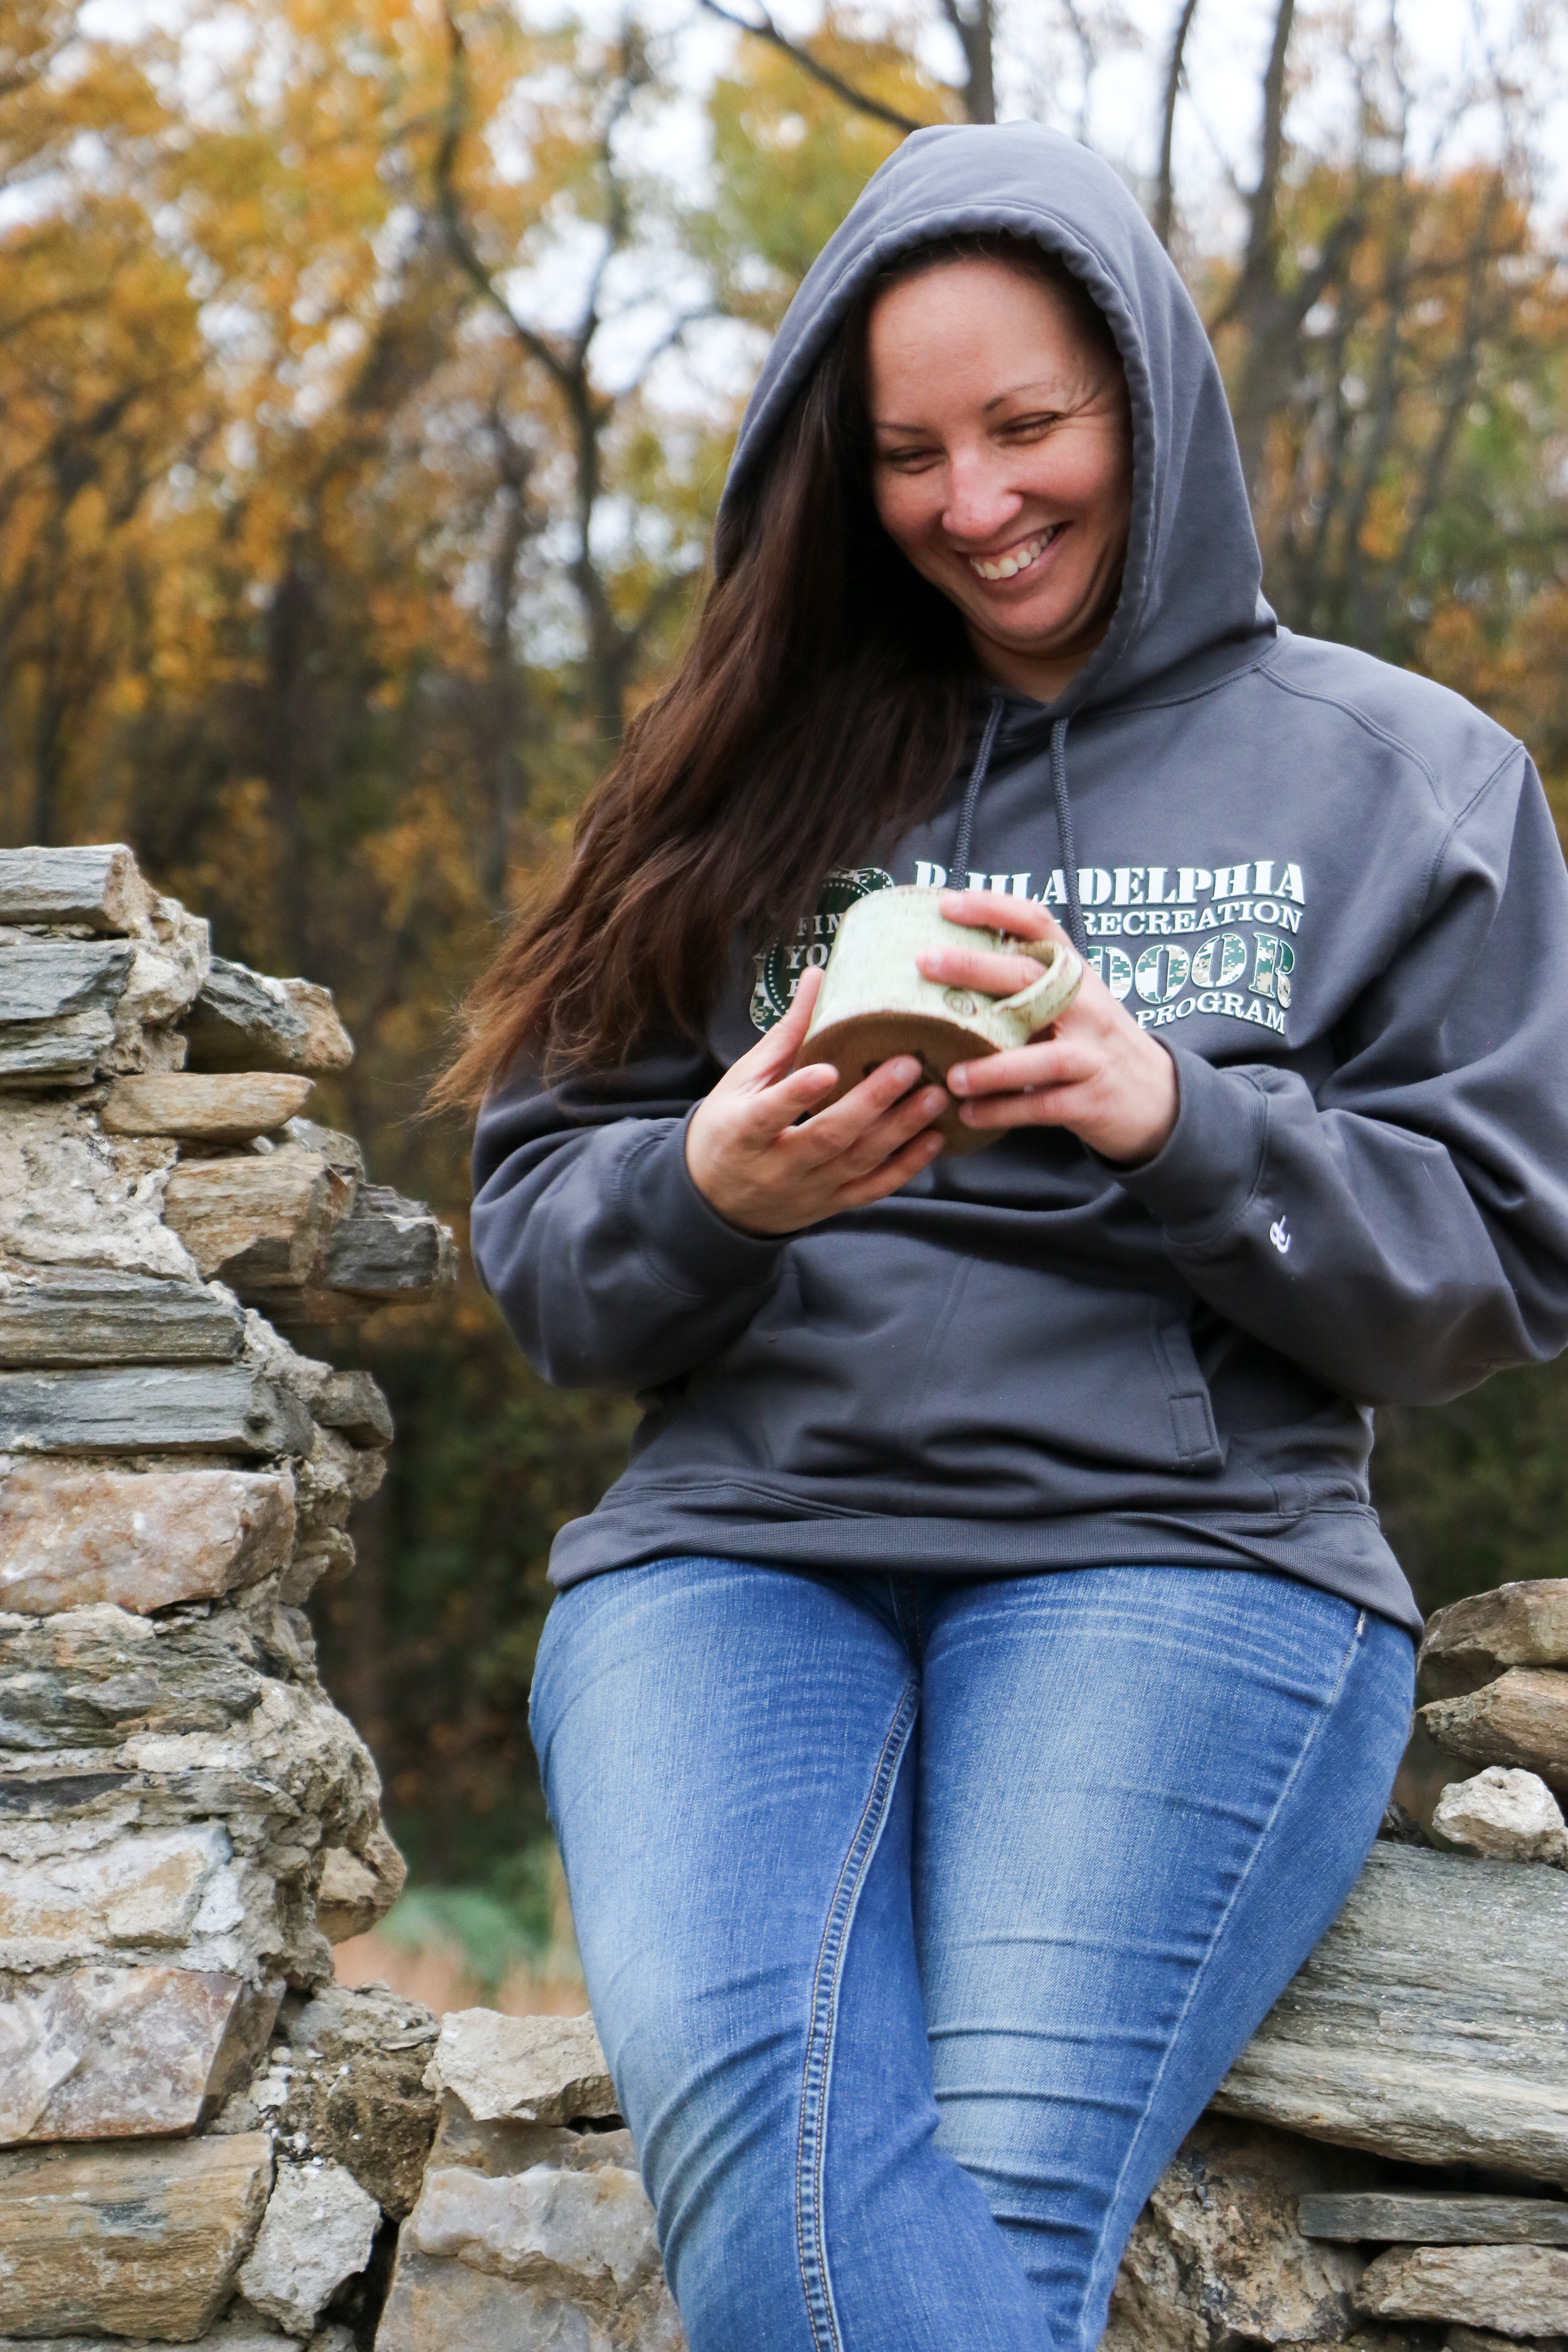 Alt text: a young white woman with long brown hair leans against a gray rock formation while holding a cup of hot tea. She’s smiling while looking down at the tea and wearing a gray and green Philadel